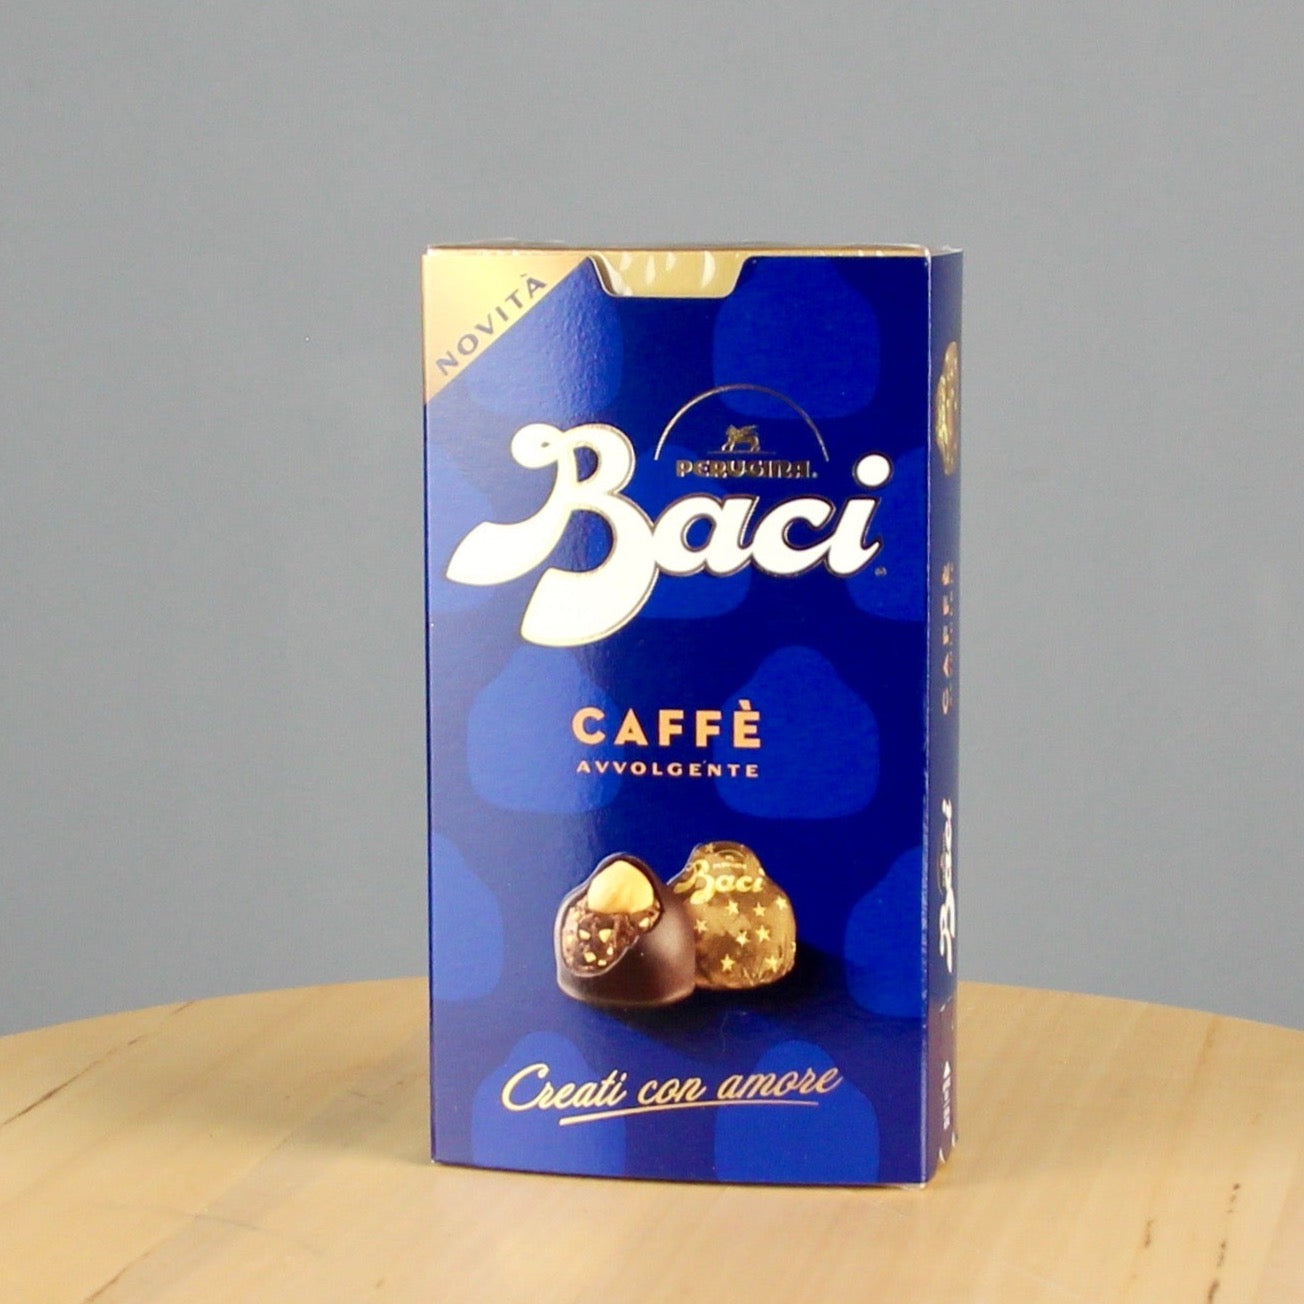 Baci chocolate delivery in Genoa